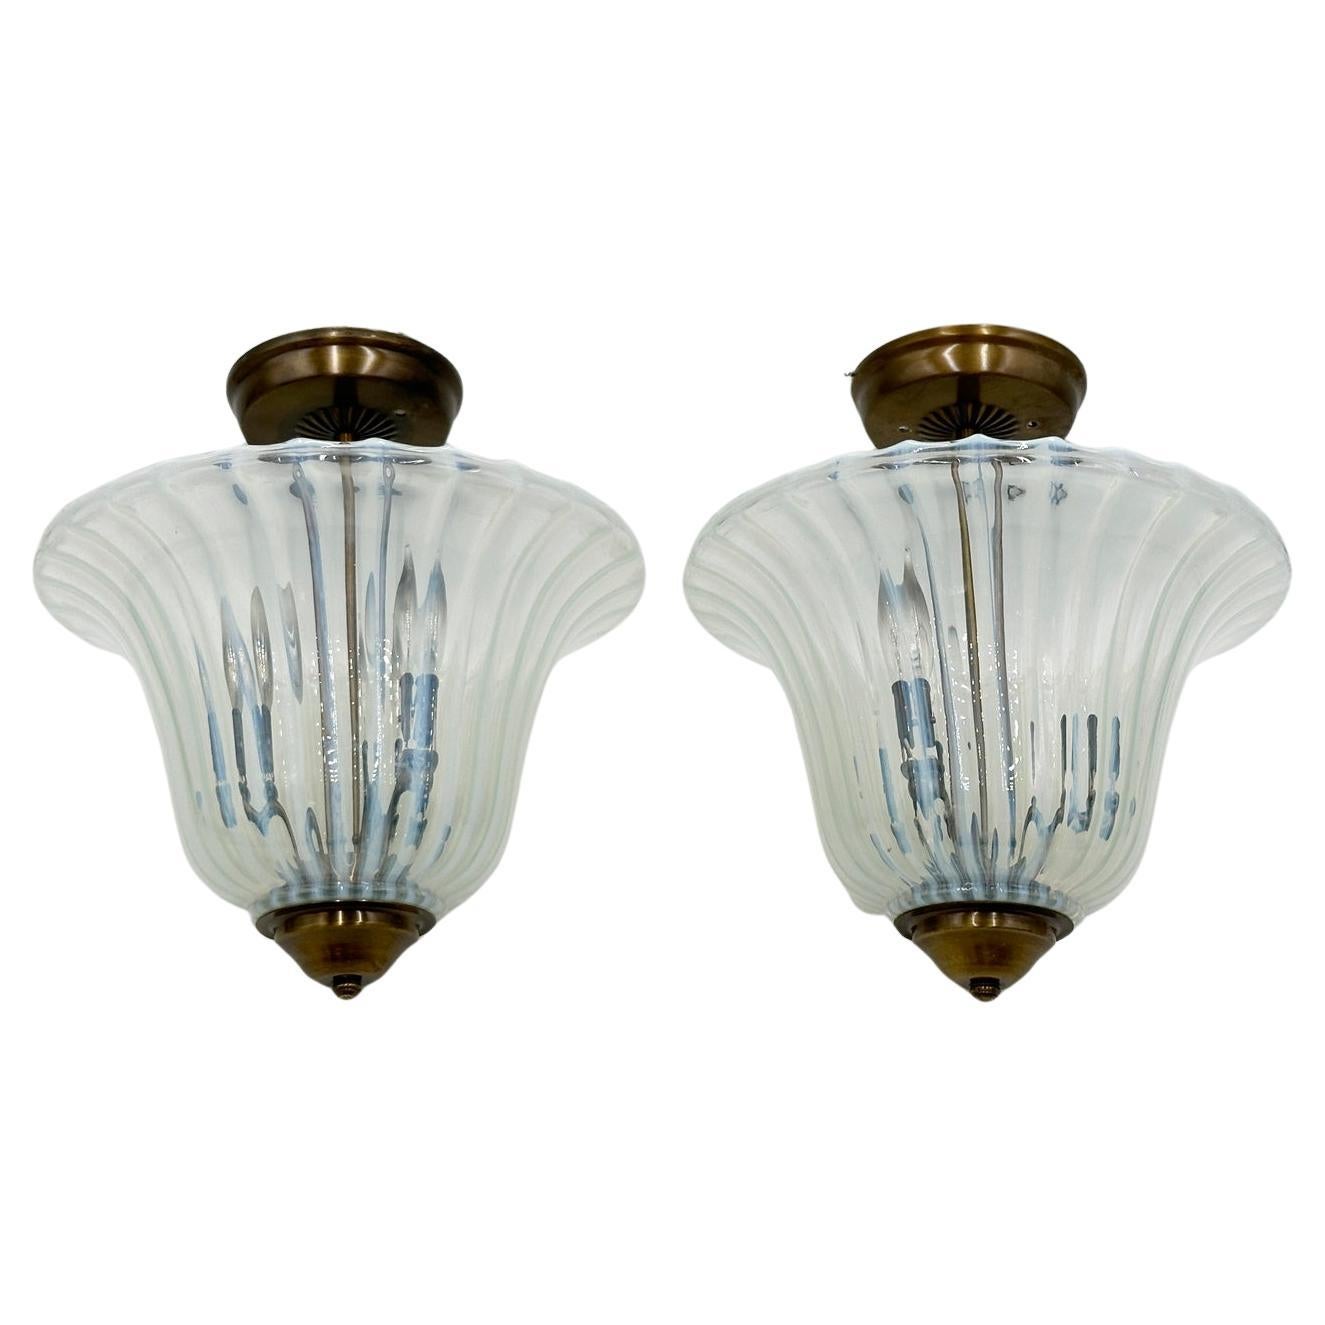 Vintage Set of Murano Glass & Brass Pendant Lights, Italy 1960's For Sale